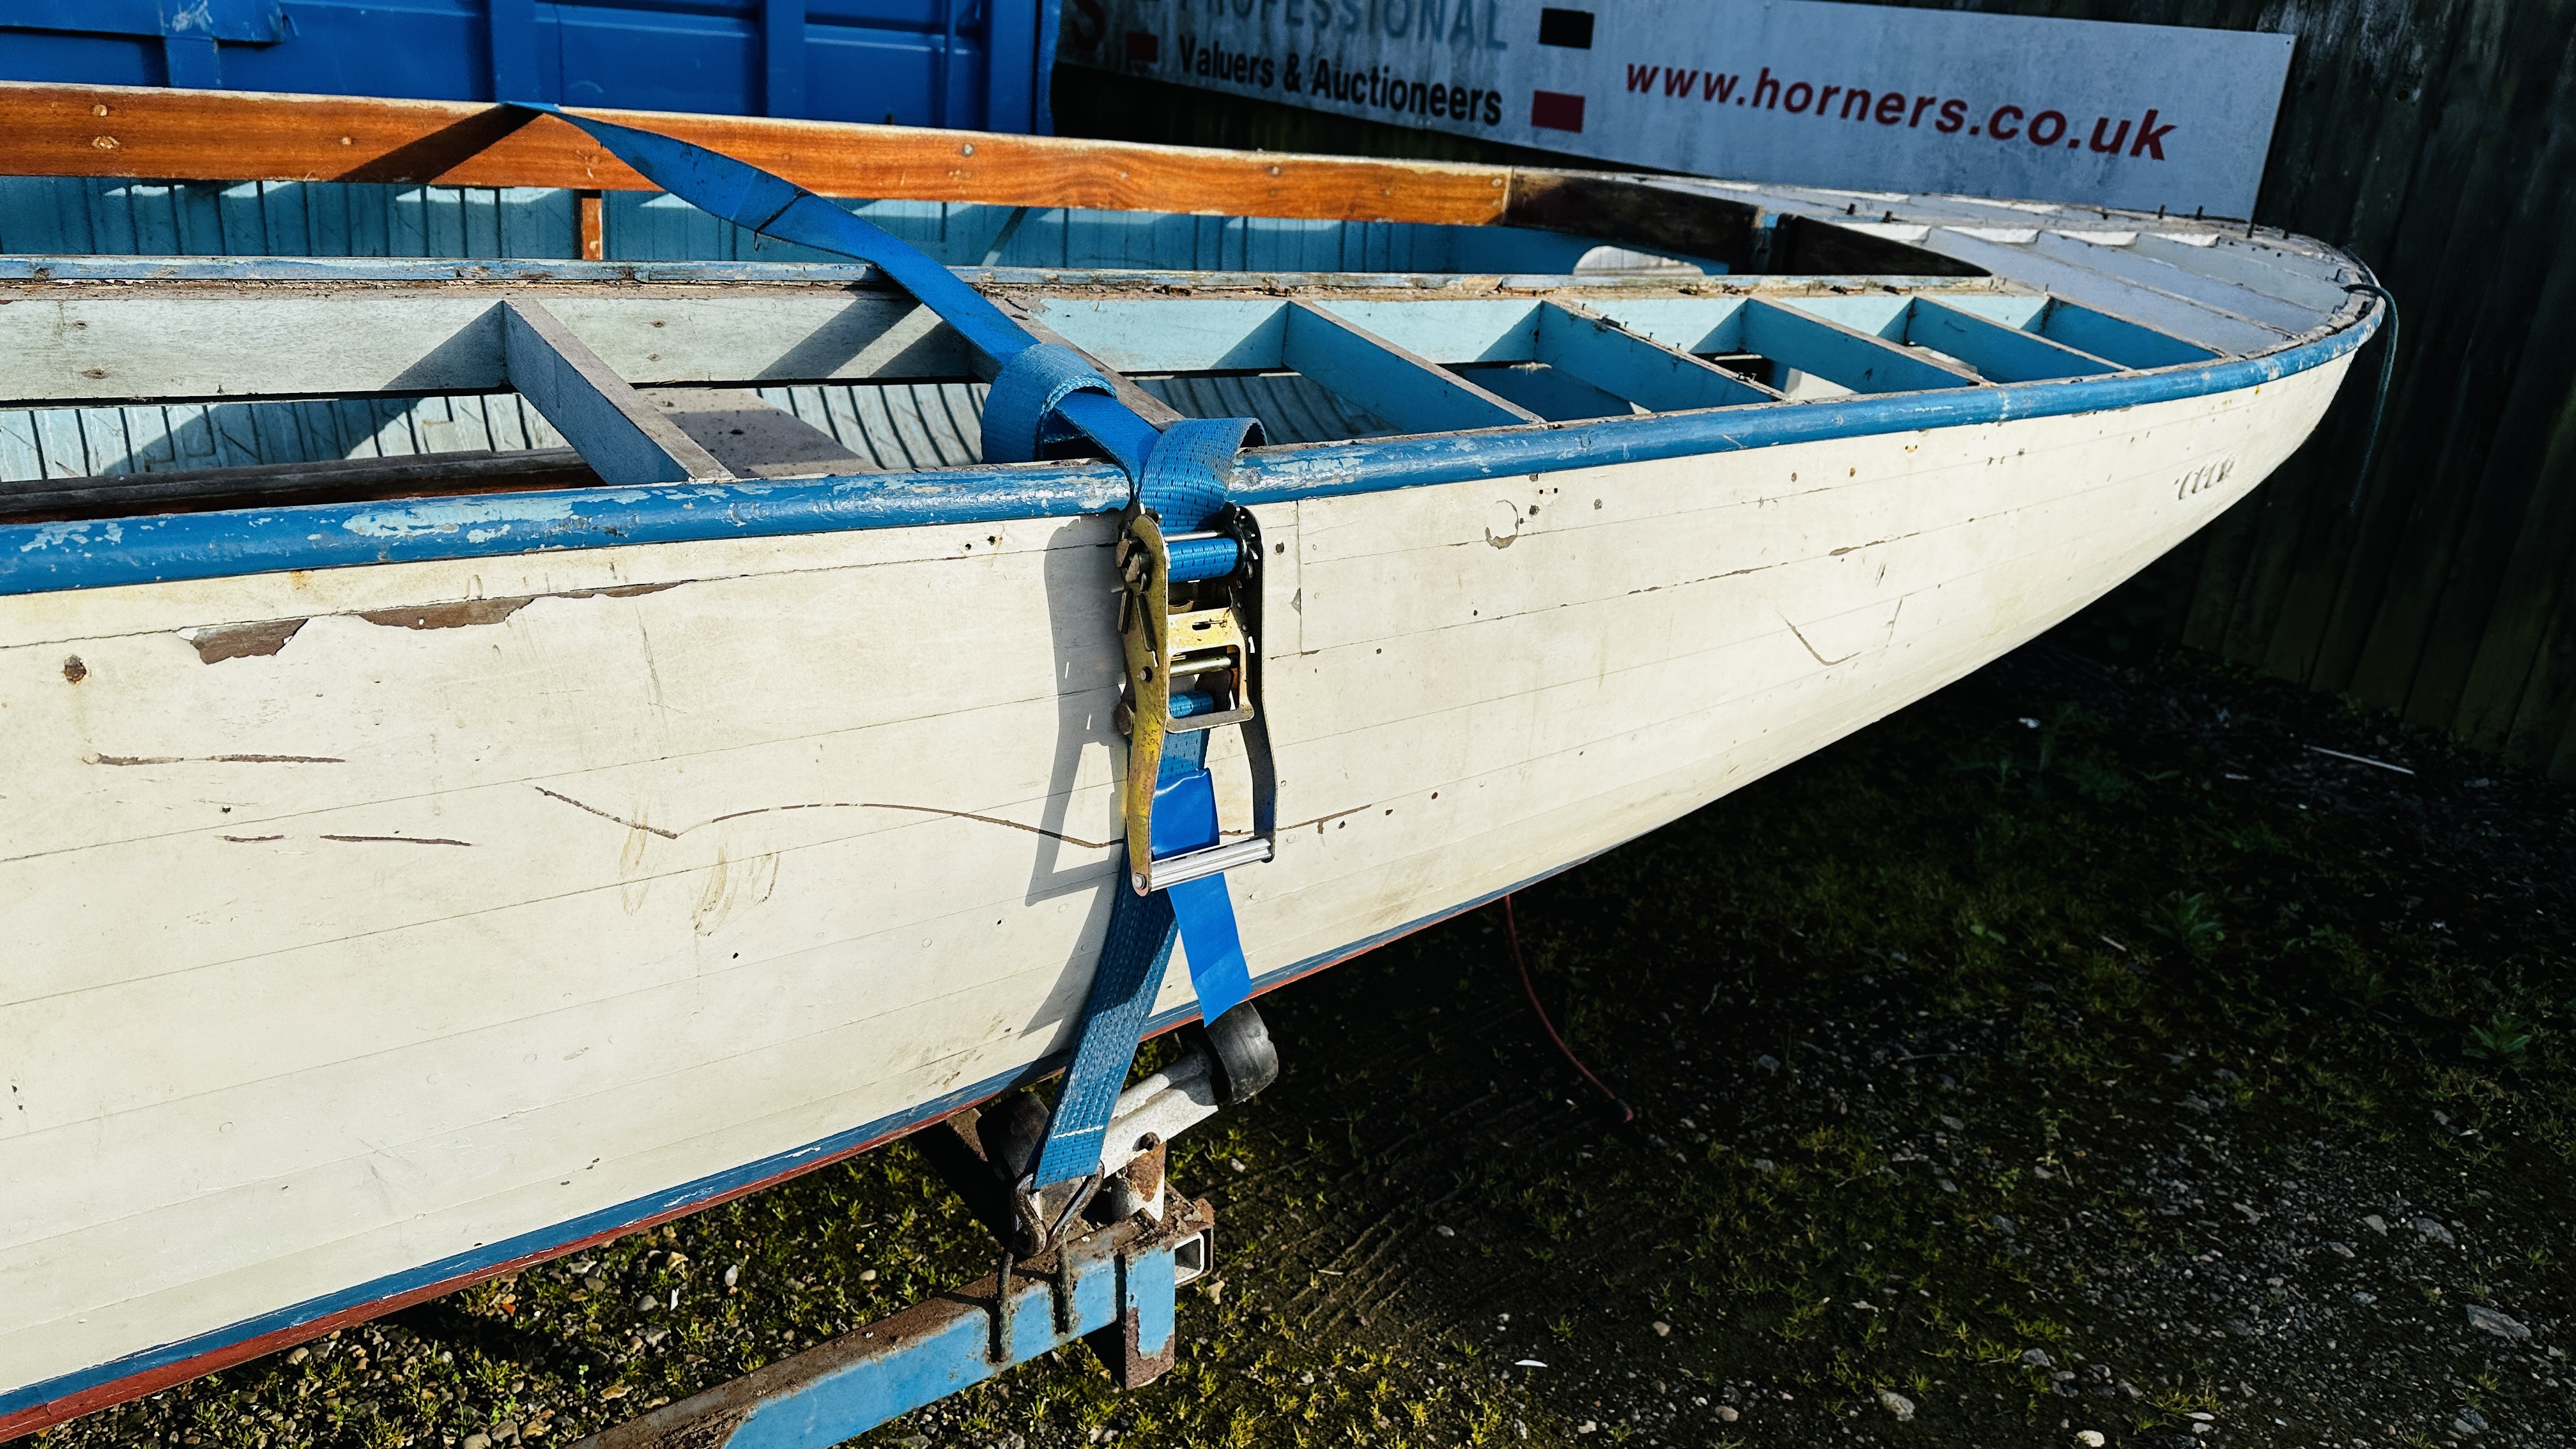 A WW2 UFFA FOX RESCUE BOAT BELIEVED TO BE BUILT BY TAYLOR WOODROW, STAMPED AW11, 1 OF 402 MADE, - Image 36 of 56